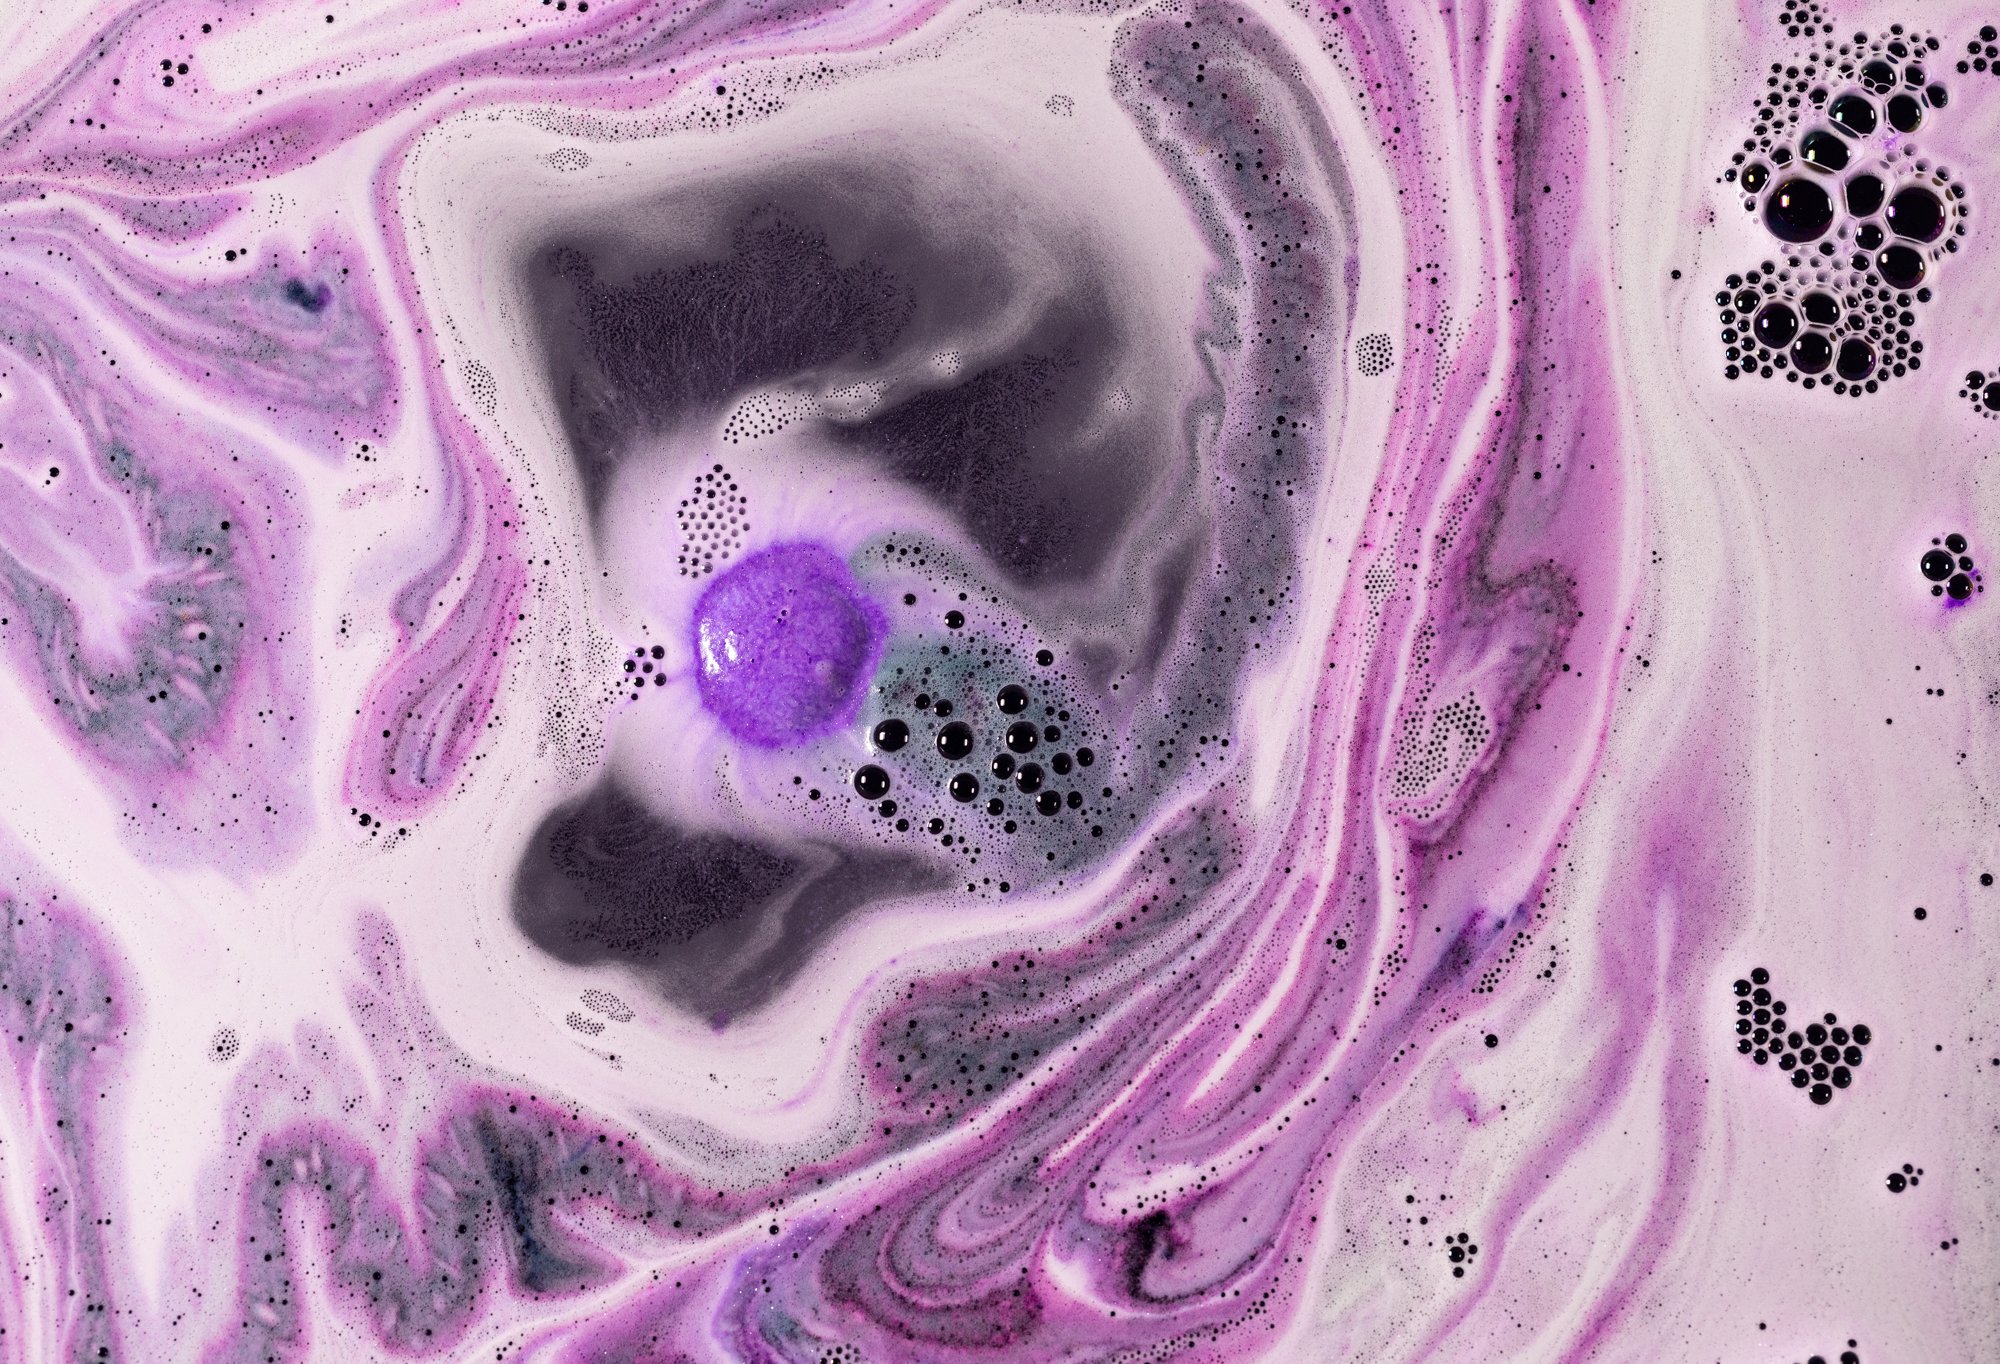 Gum-Gum Fruit bath bomb swirls and fizzes in magically deep and bright purple waters.